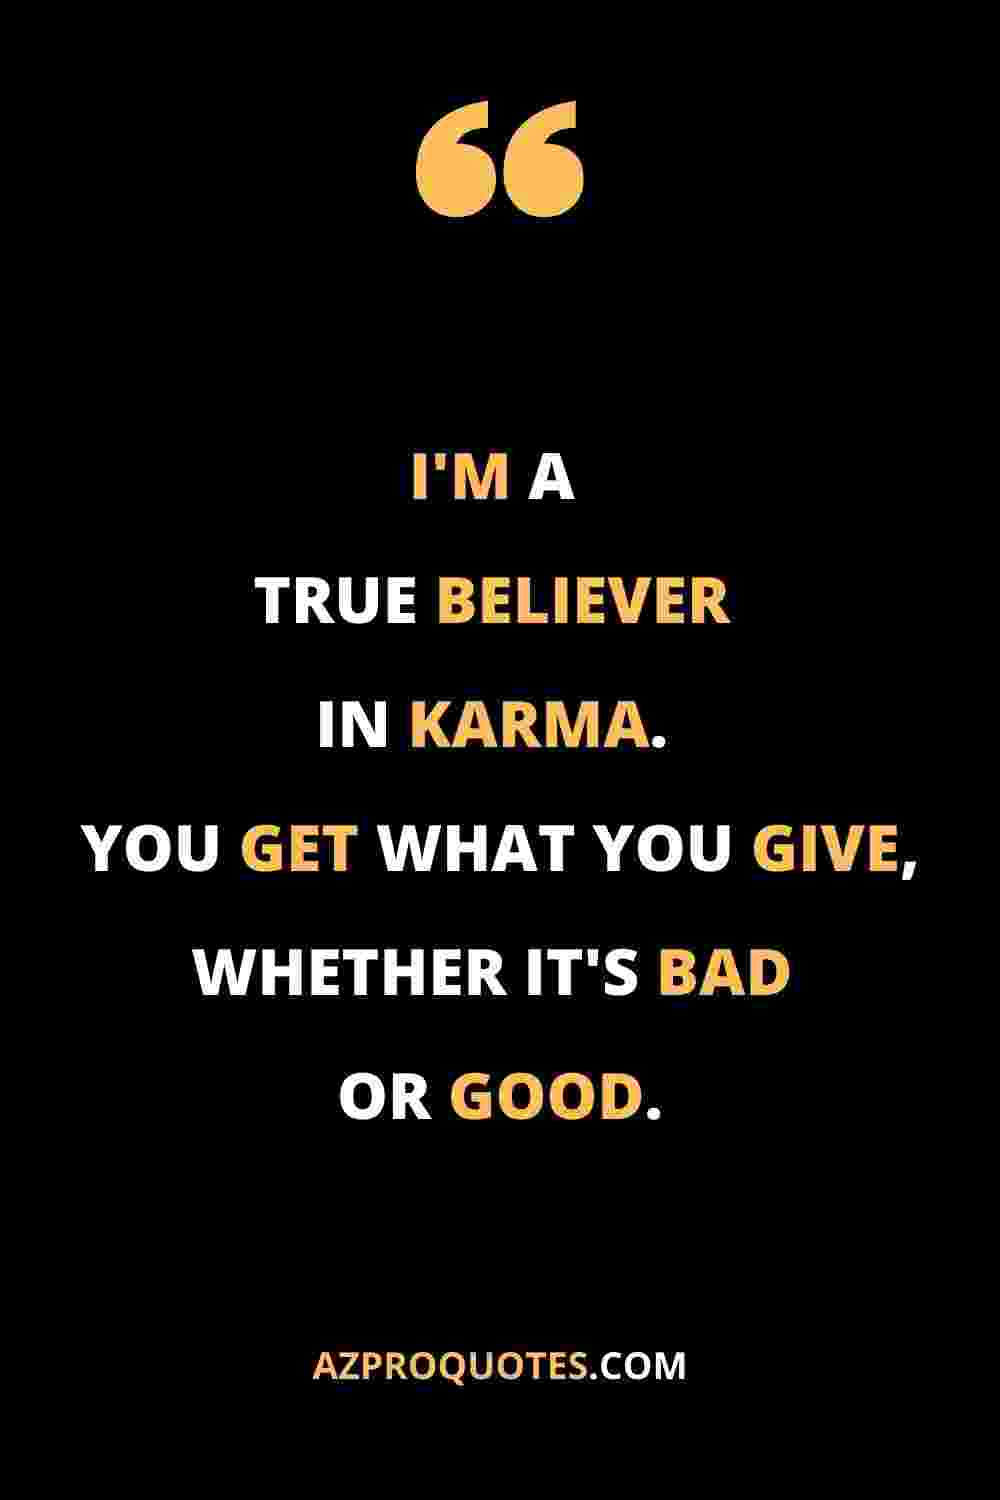 Believe in karma quotes